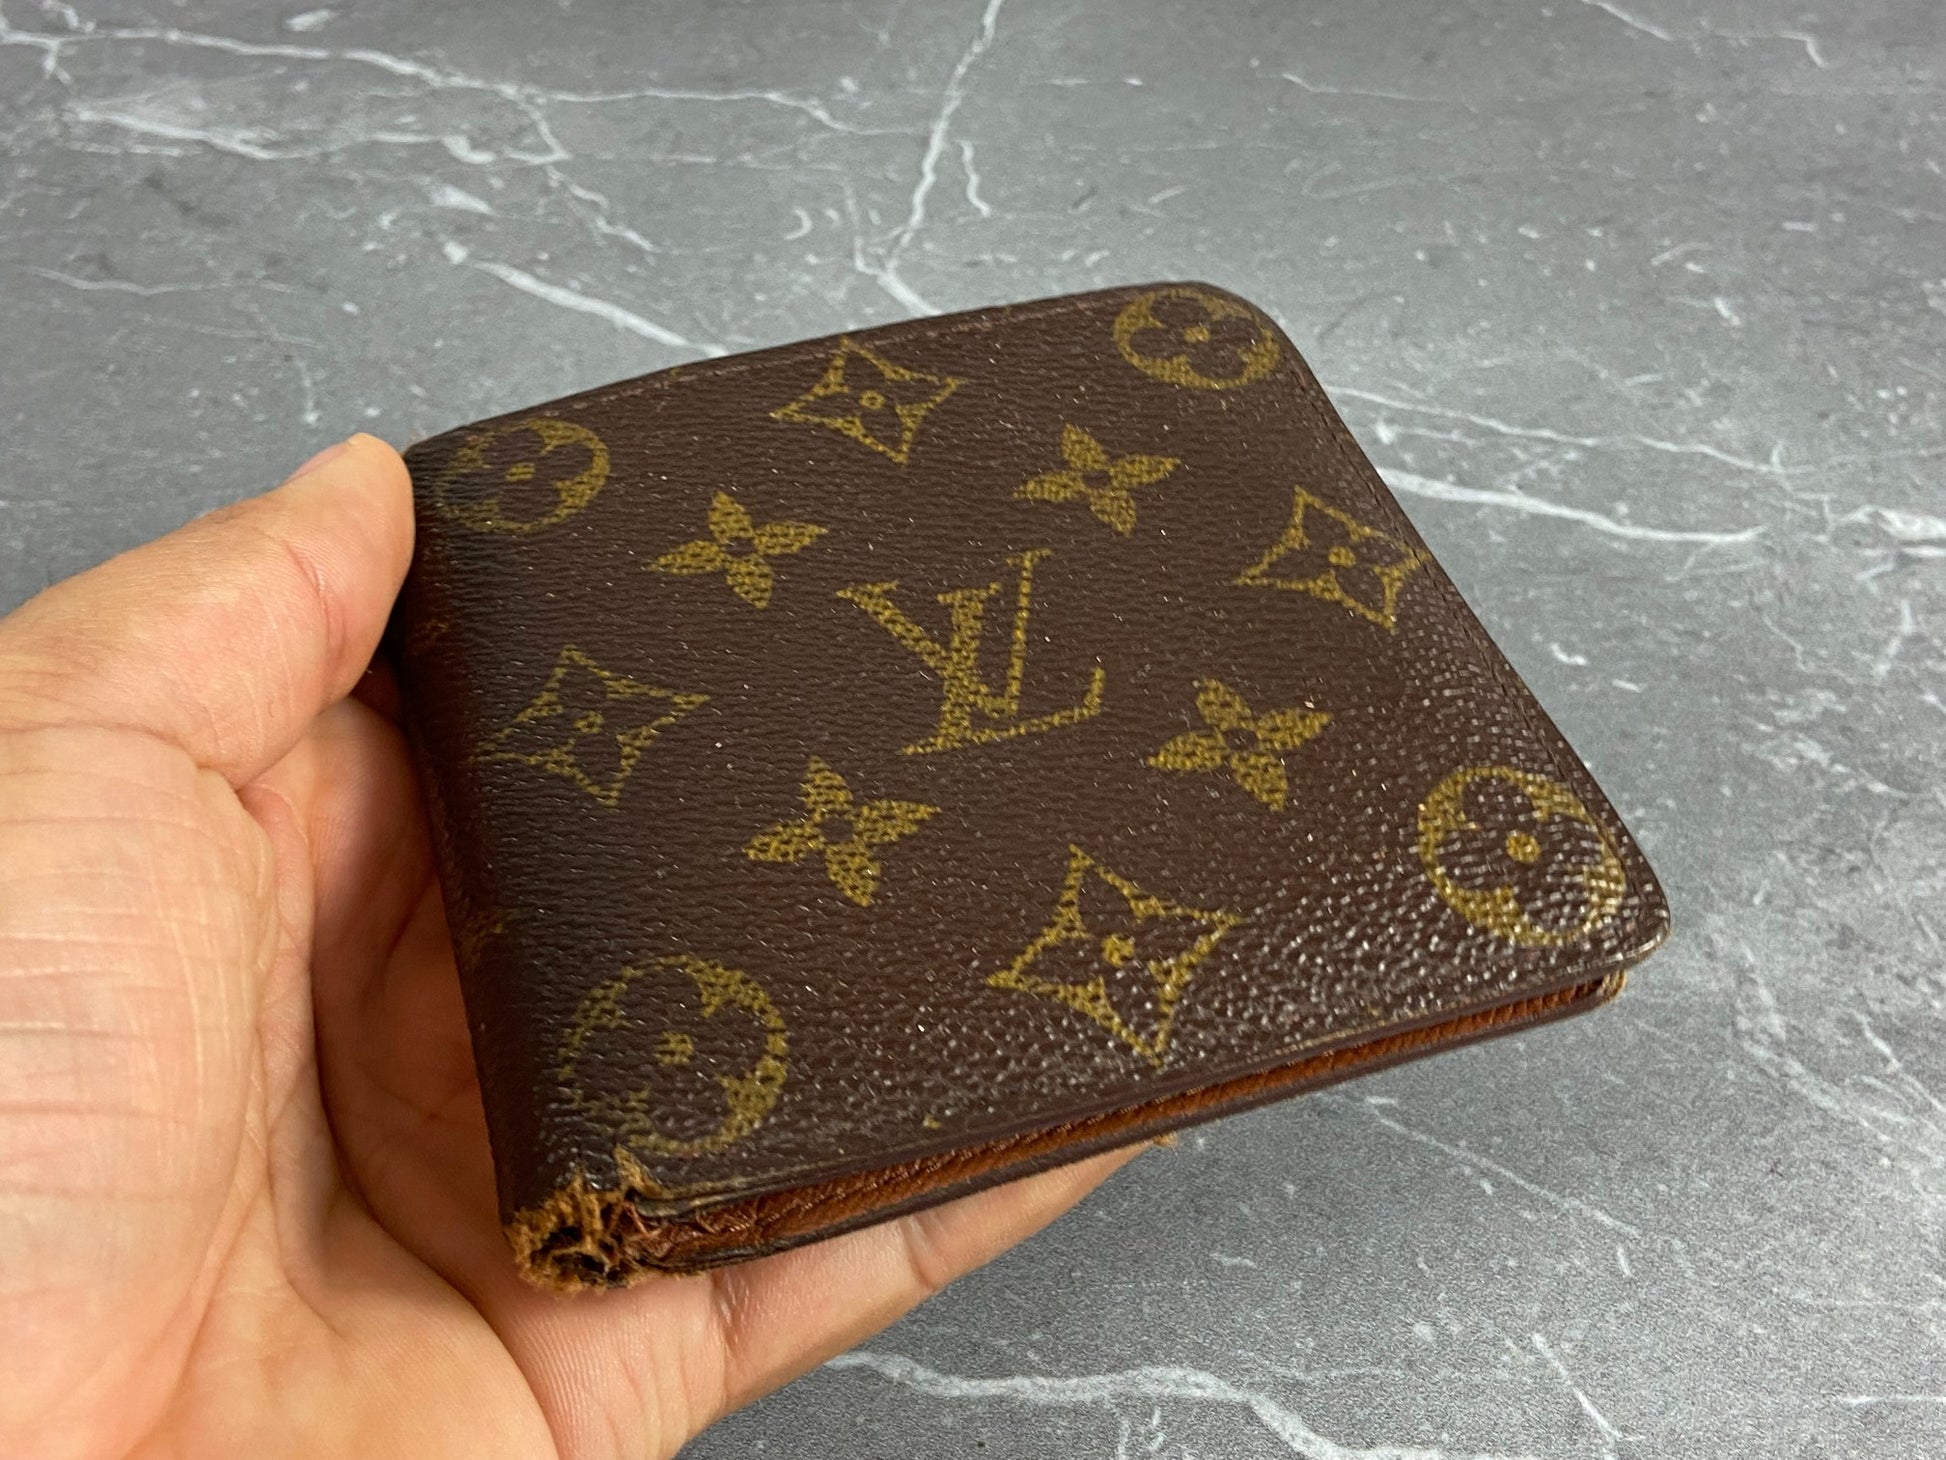 Marco Wallet Monogram Canvas - Wallets and Small Leather Goods